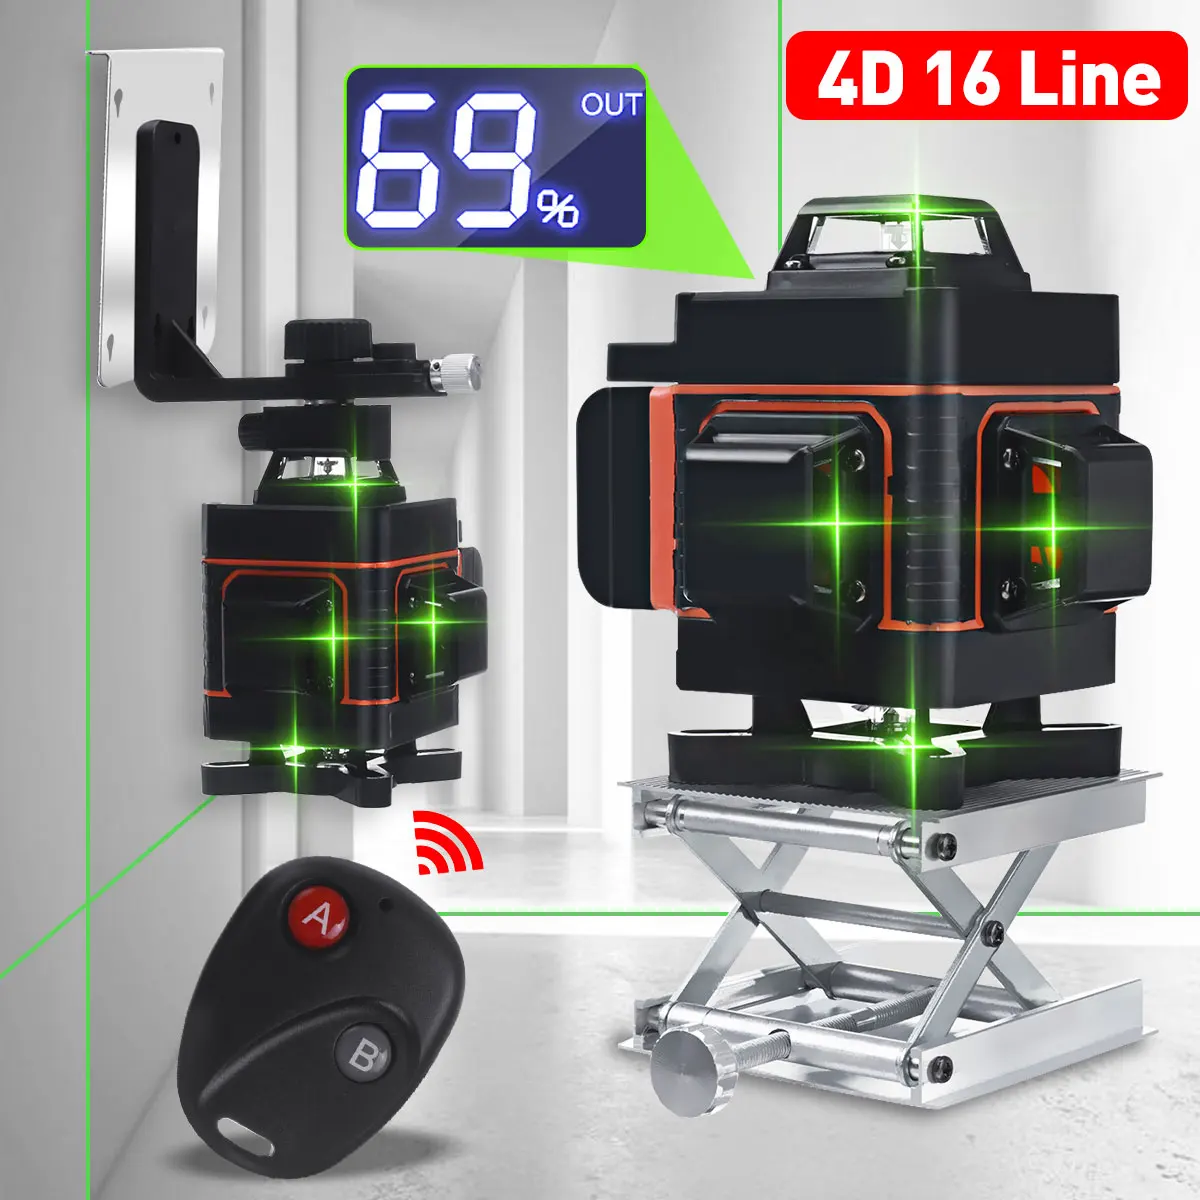 

4D Laser Level 16/12/8 Lines Green Light LED Display Auto Self Leveling 360° Rotary Horizontal Vertical Measure Remote Control